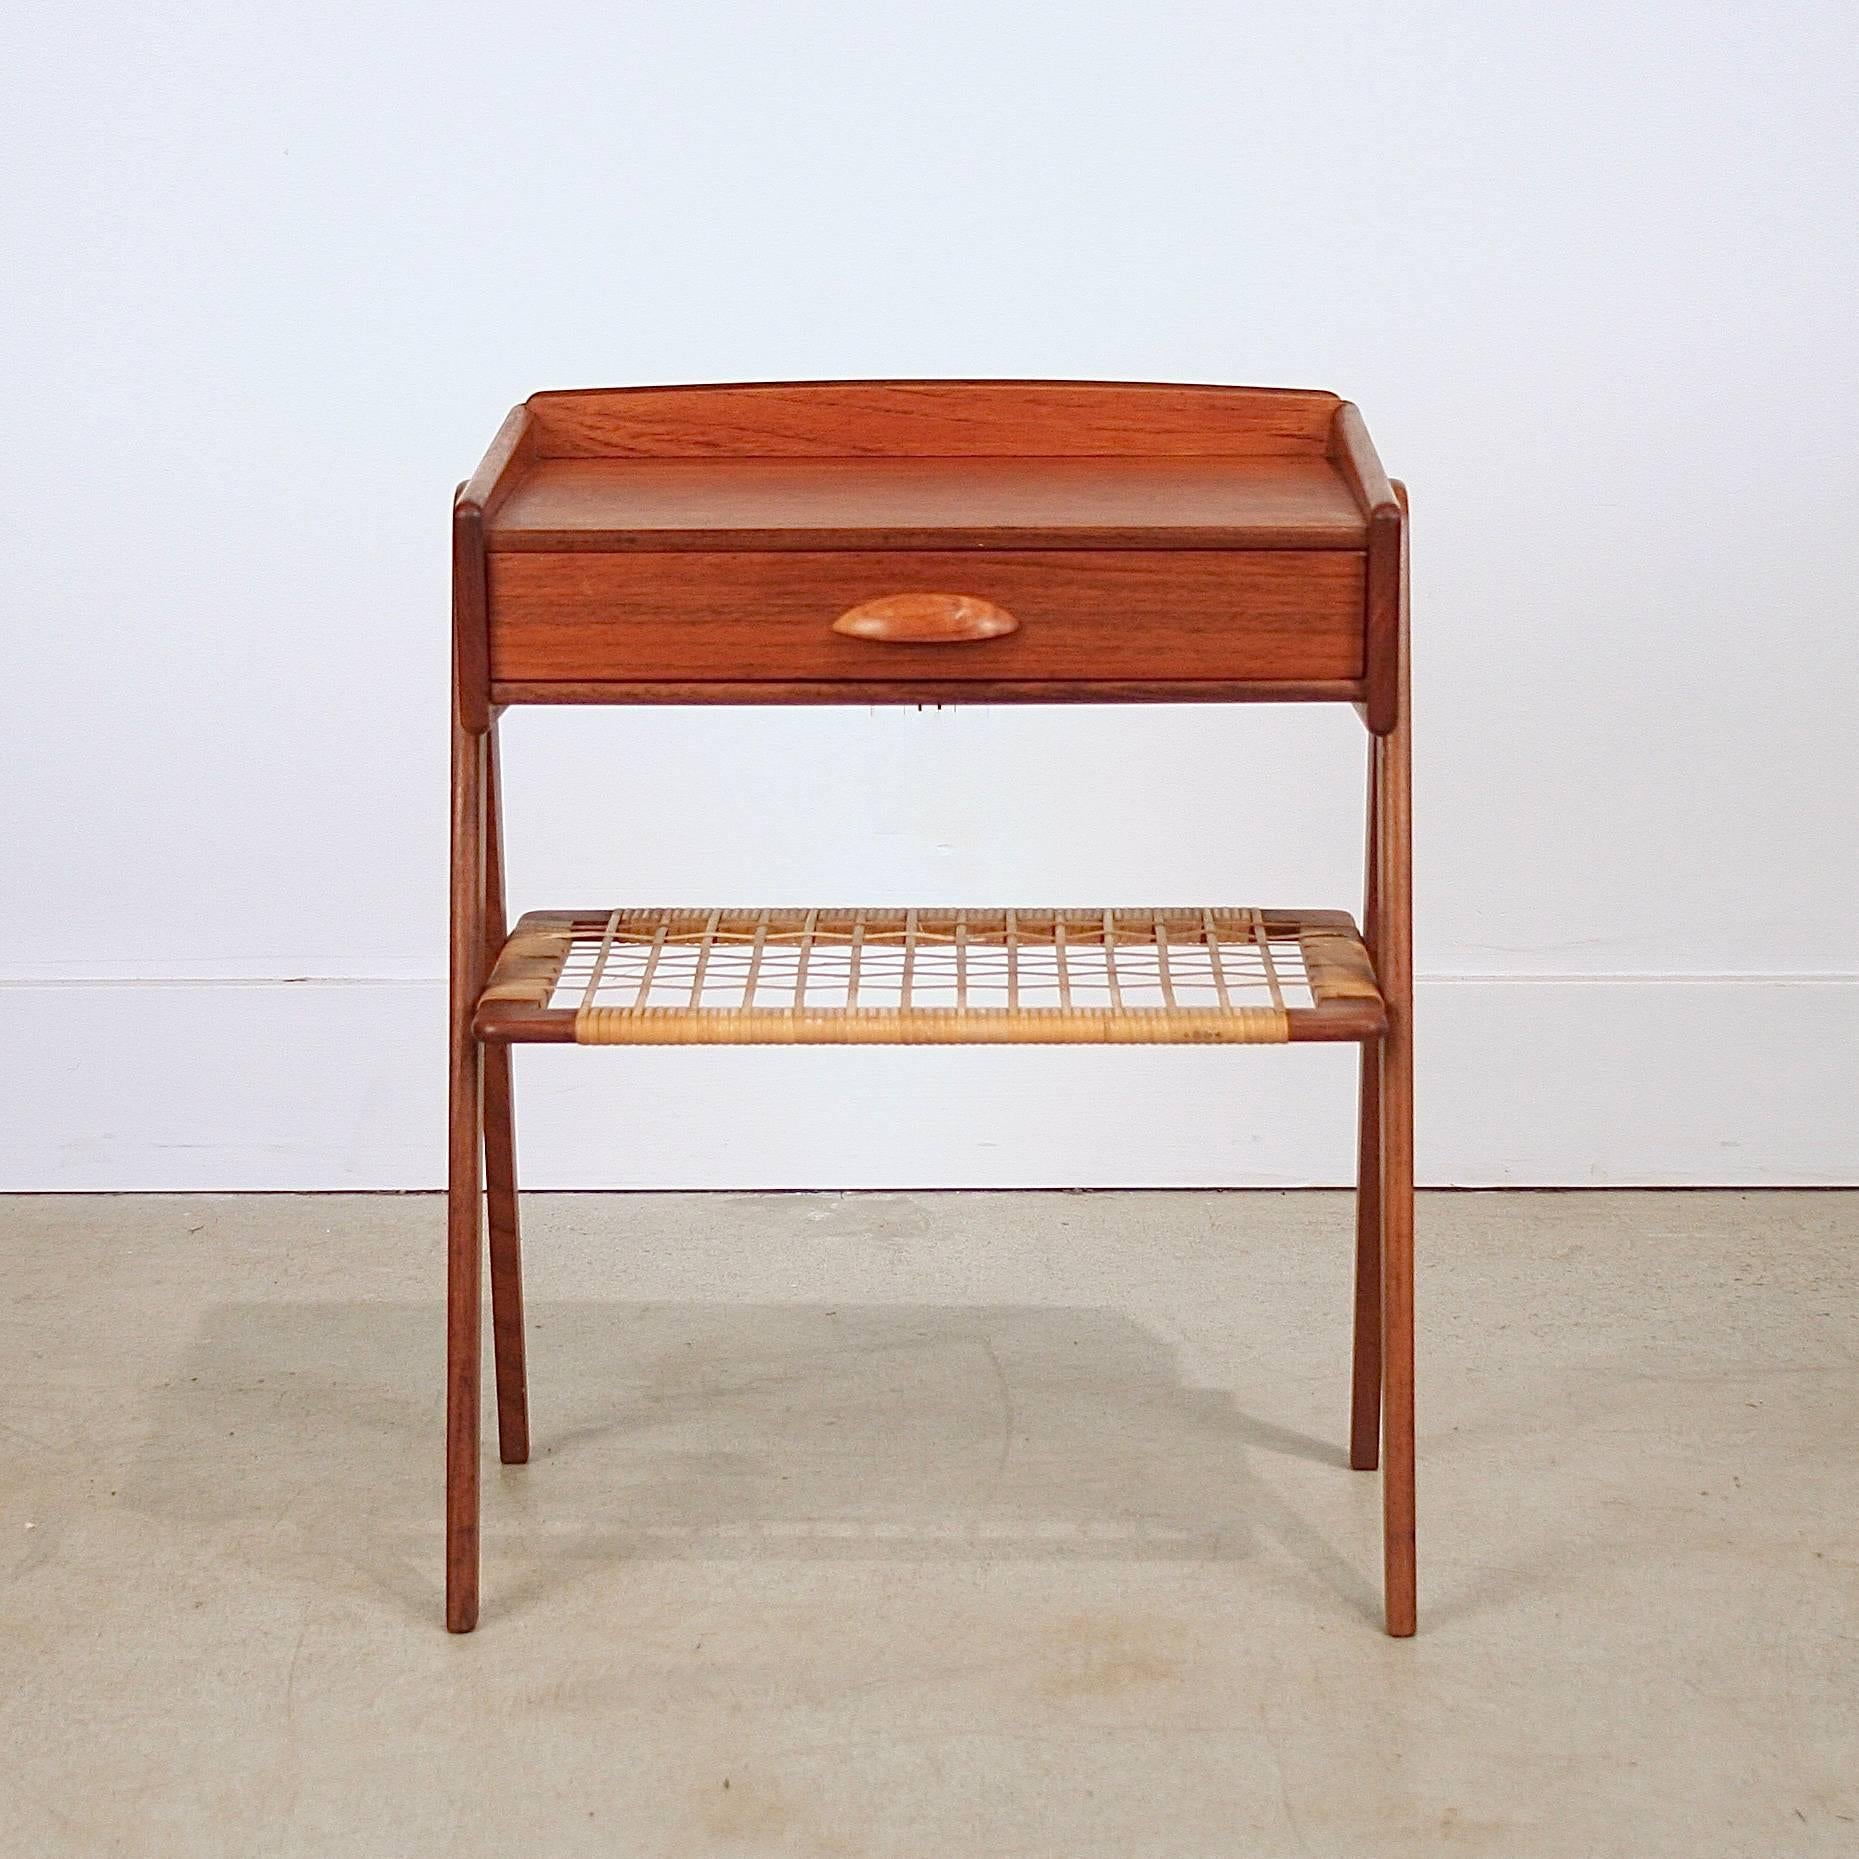 Mid-20th Century Vintage Danish Teak Side Table with Cane Shelf For Sale